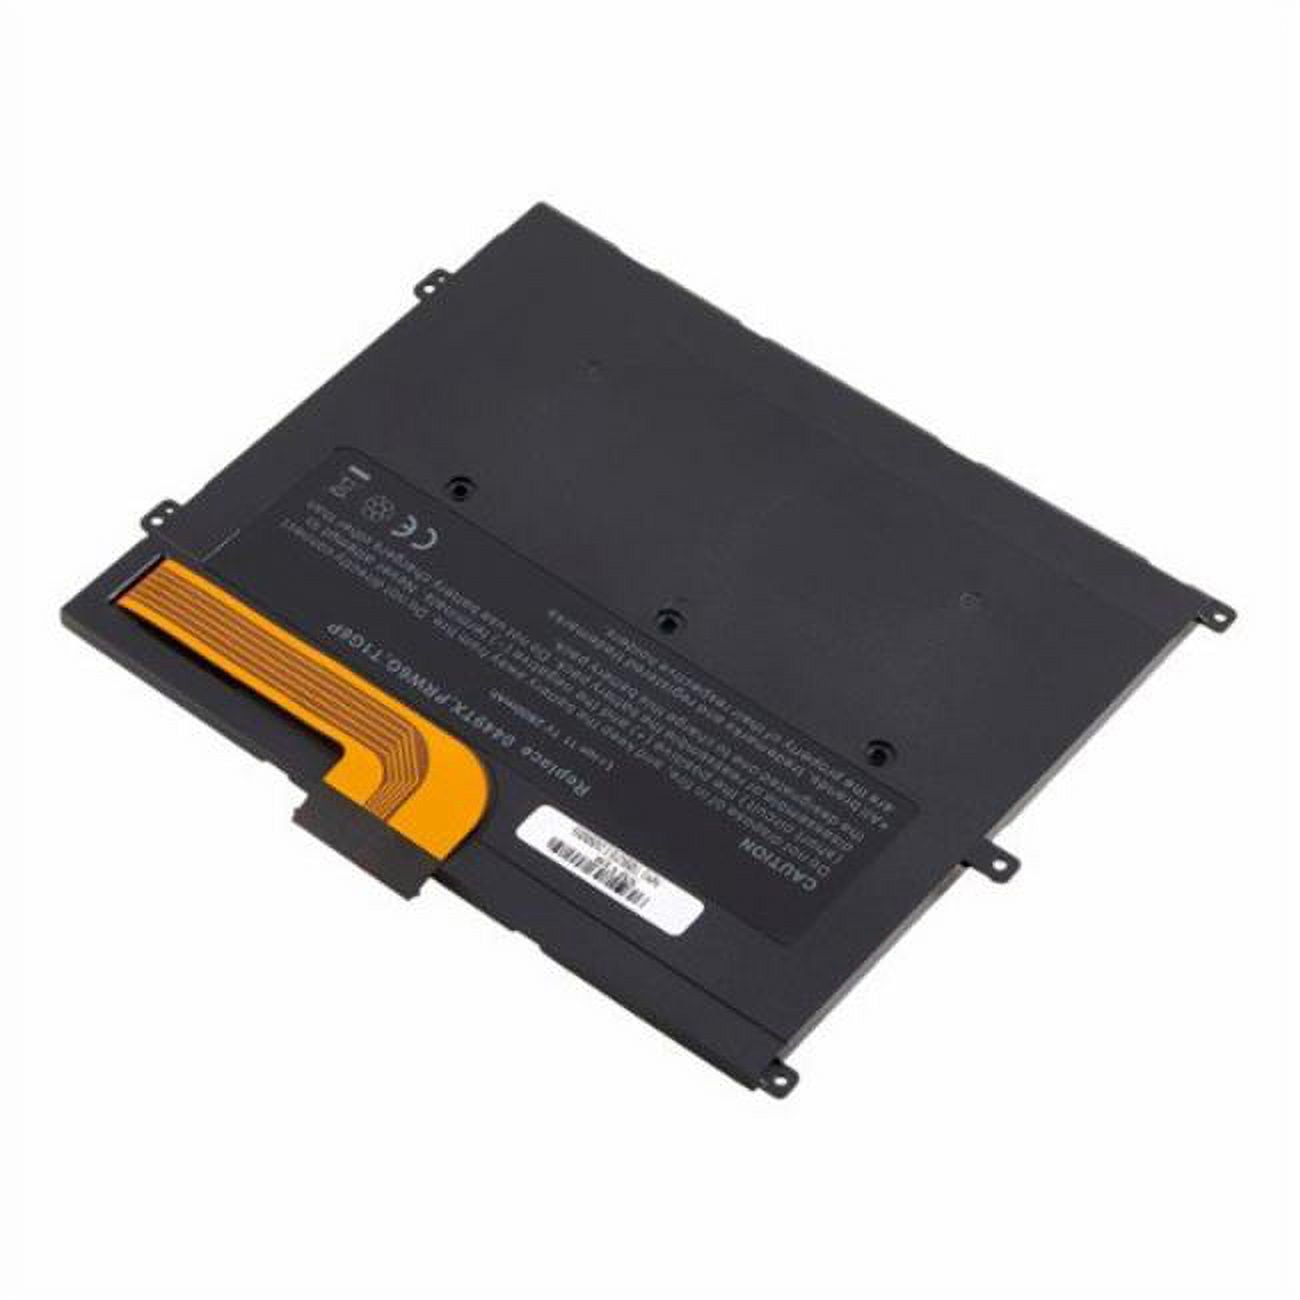 Picture of Denaq NM-V130 3-Cell Lithium-Polymer Battery for Dell Vostro Laptops